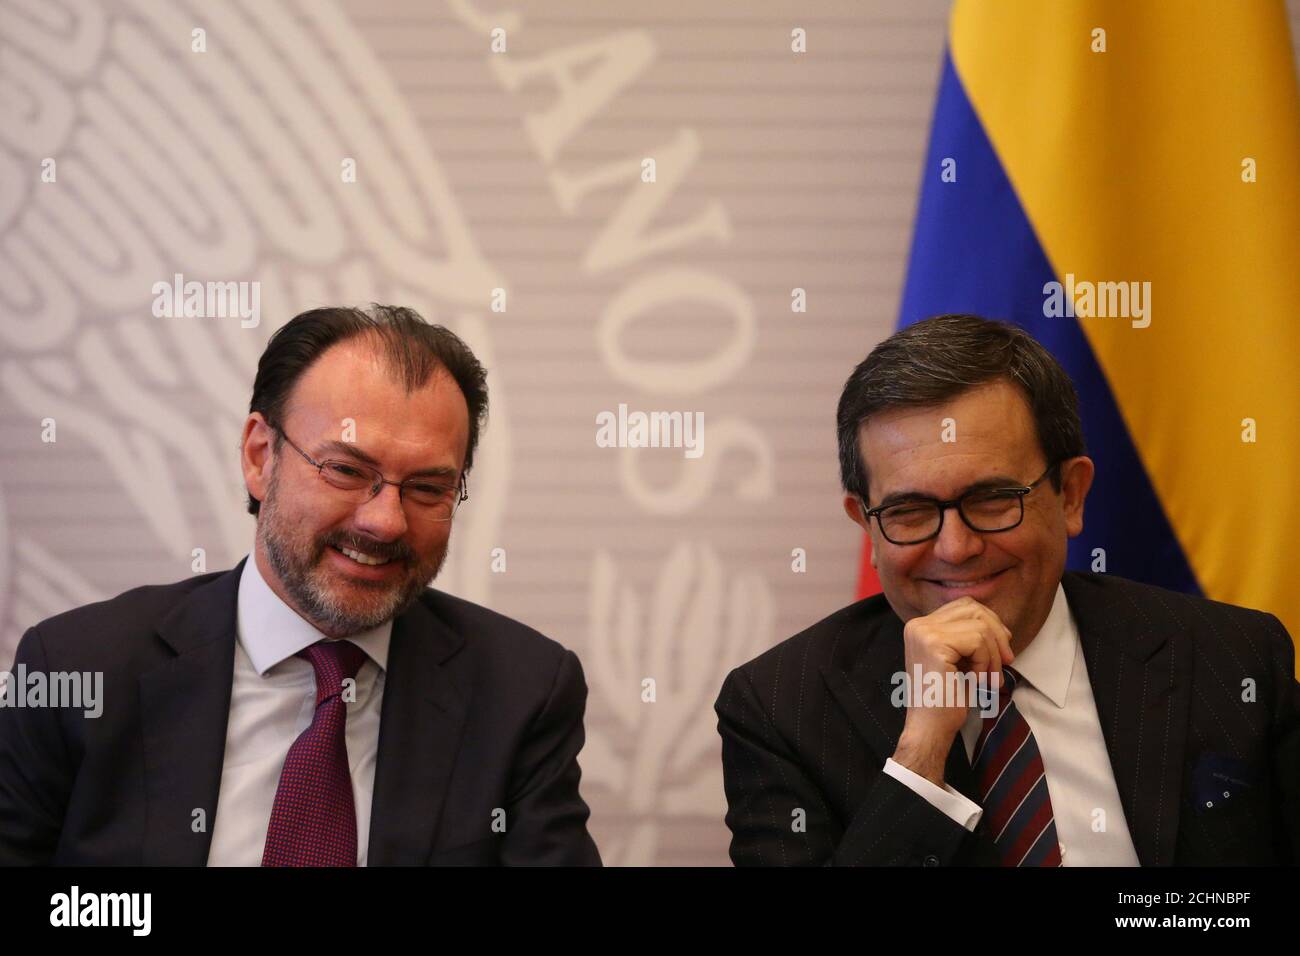 Mexico's Foreign Minister Luis Videgaray and Mexico's Economy Minister Ildefonso Guajardo smile during the XVII meeting of Council Ministers of the Pacific Alliance, in Mexico City, Mexico, June 2, 2017. REUTERS/Edgard Garrido Stock Photo